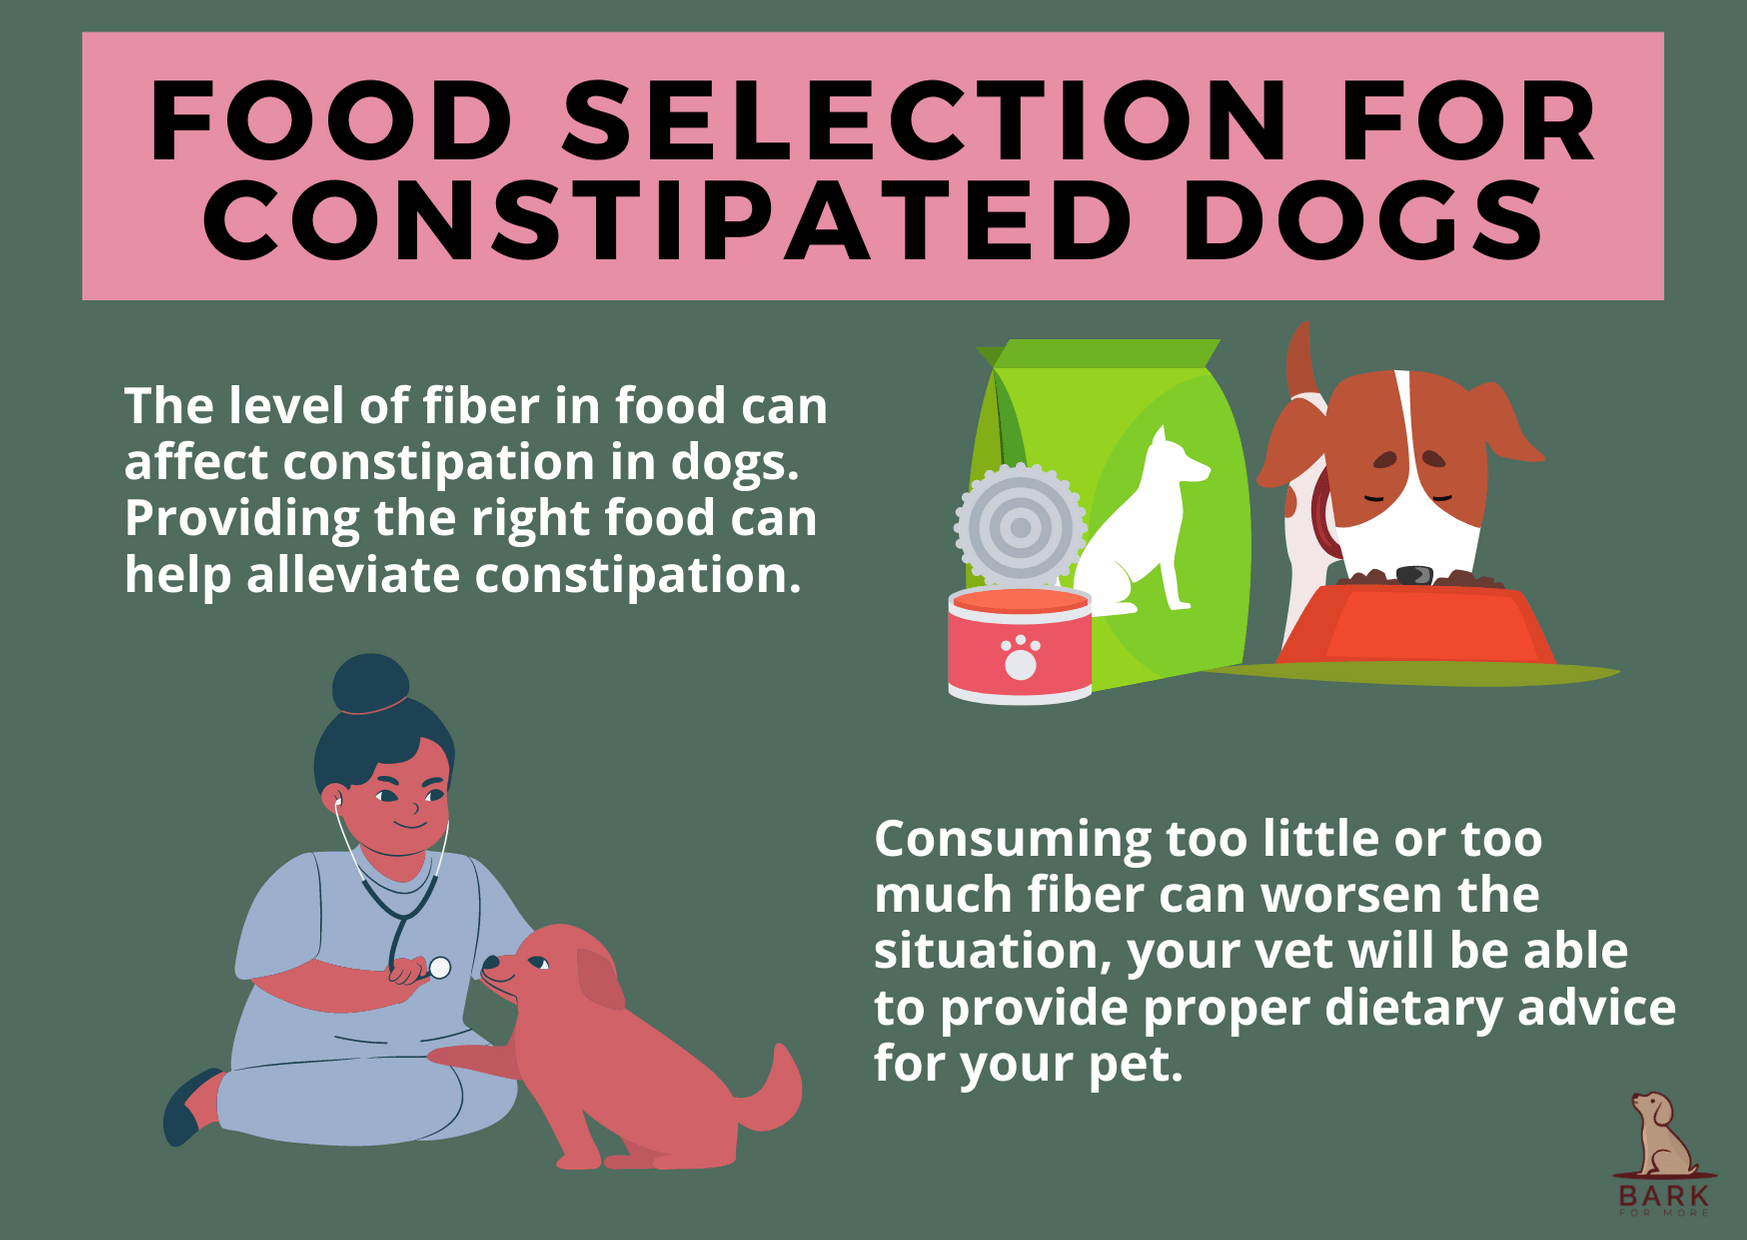 Food selection for constipated dogs